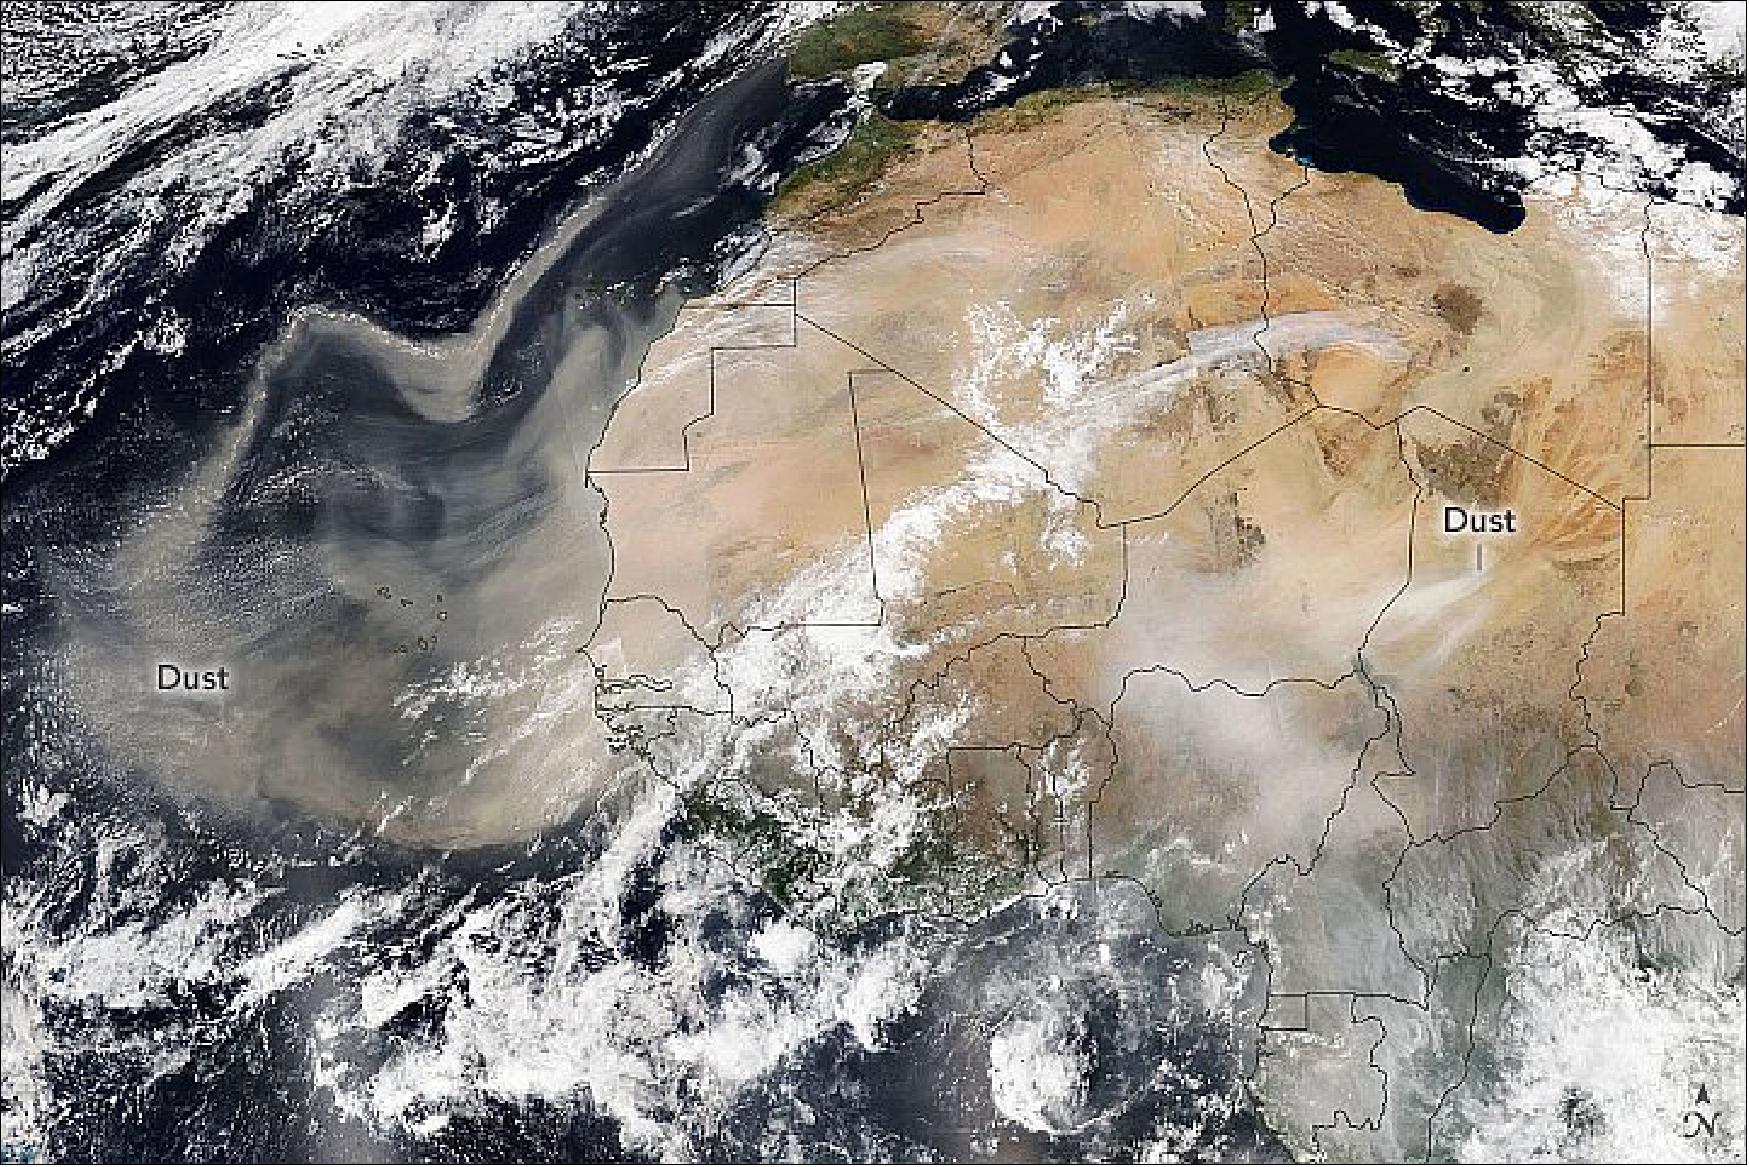 Figure 35: A dramatic display of airborne dust particles was observed on February 18, 2021, by the Visible Infrared Imaging Radiometer Suite (VIIRS) on the NOAA-20 spacecraft. The dust appears widespread, but particularly stirred up over the Bodélé Depression in northeastern Chad (image credit: NASA Earth Observatory image by Lauren Dauphin, using VIIRS data from NASA EOSDIS LANCE, GIBS/Worldview, and the Suomi National Polar-orbiting Partnership. Story by Kathryn Hansen)